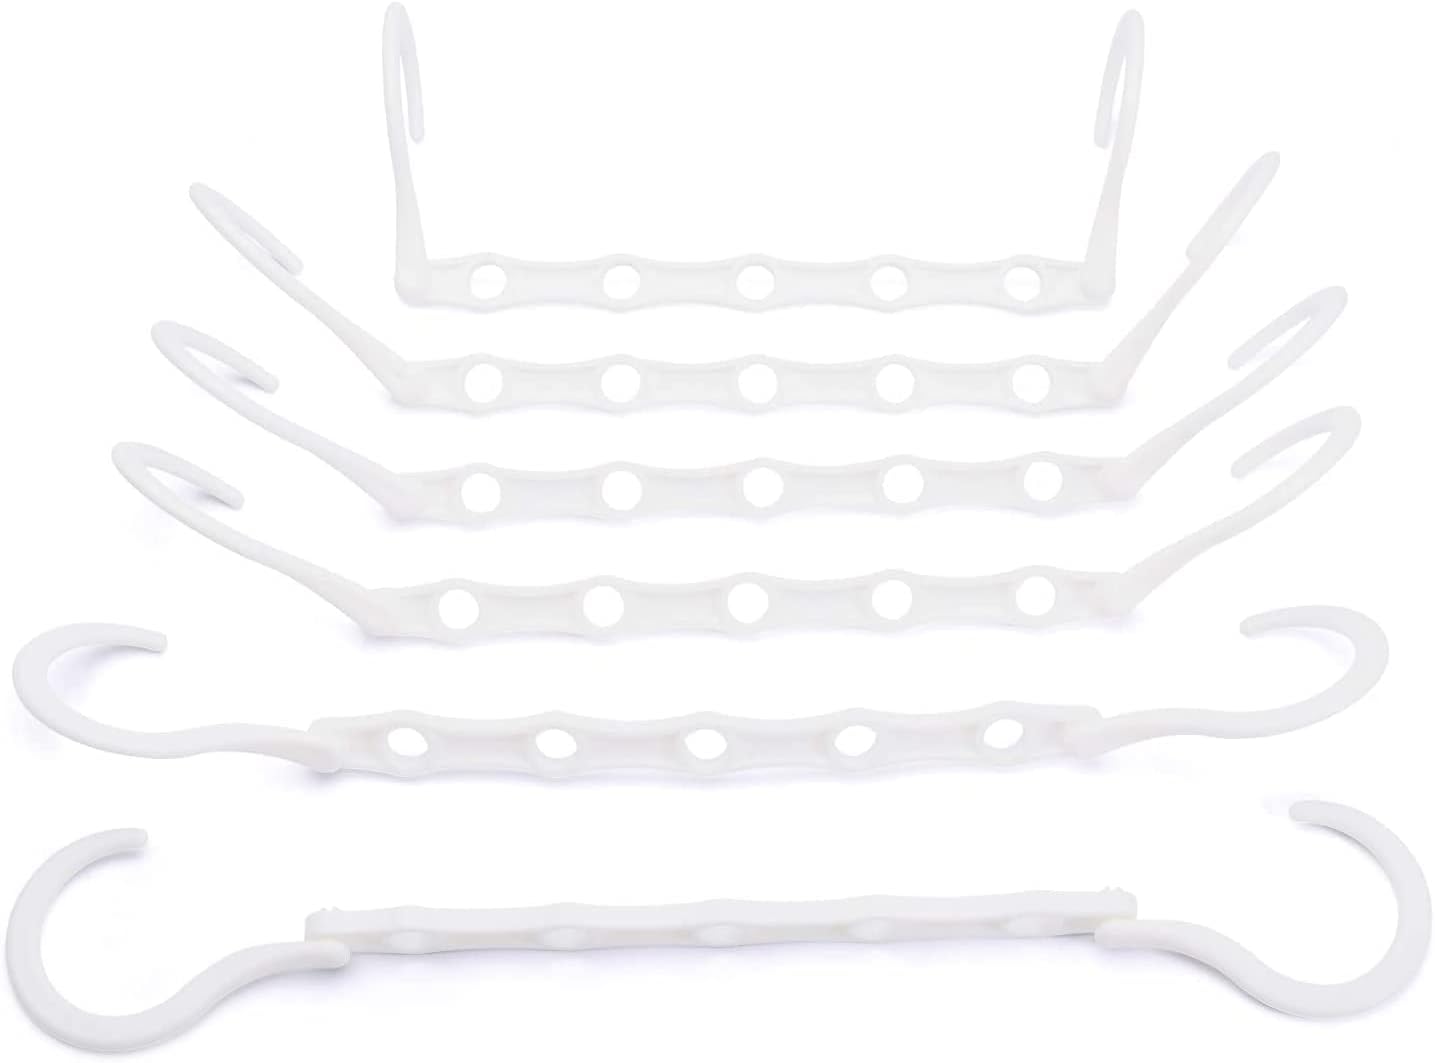 HOUSE DAY 15 Inch Plastic Hangers Space Saving Organizers White 20 Pack